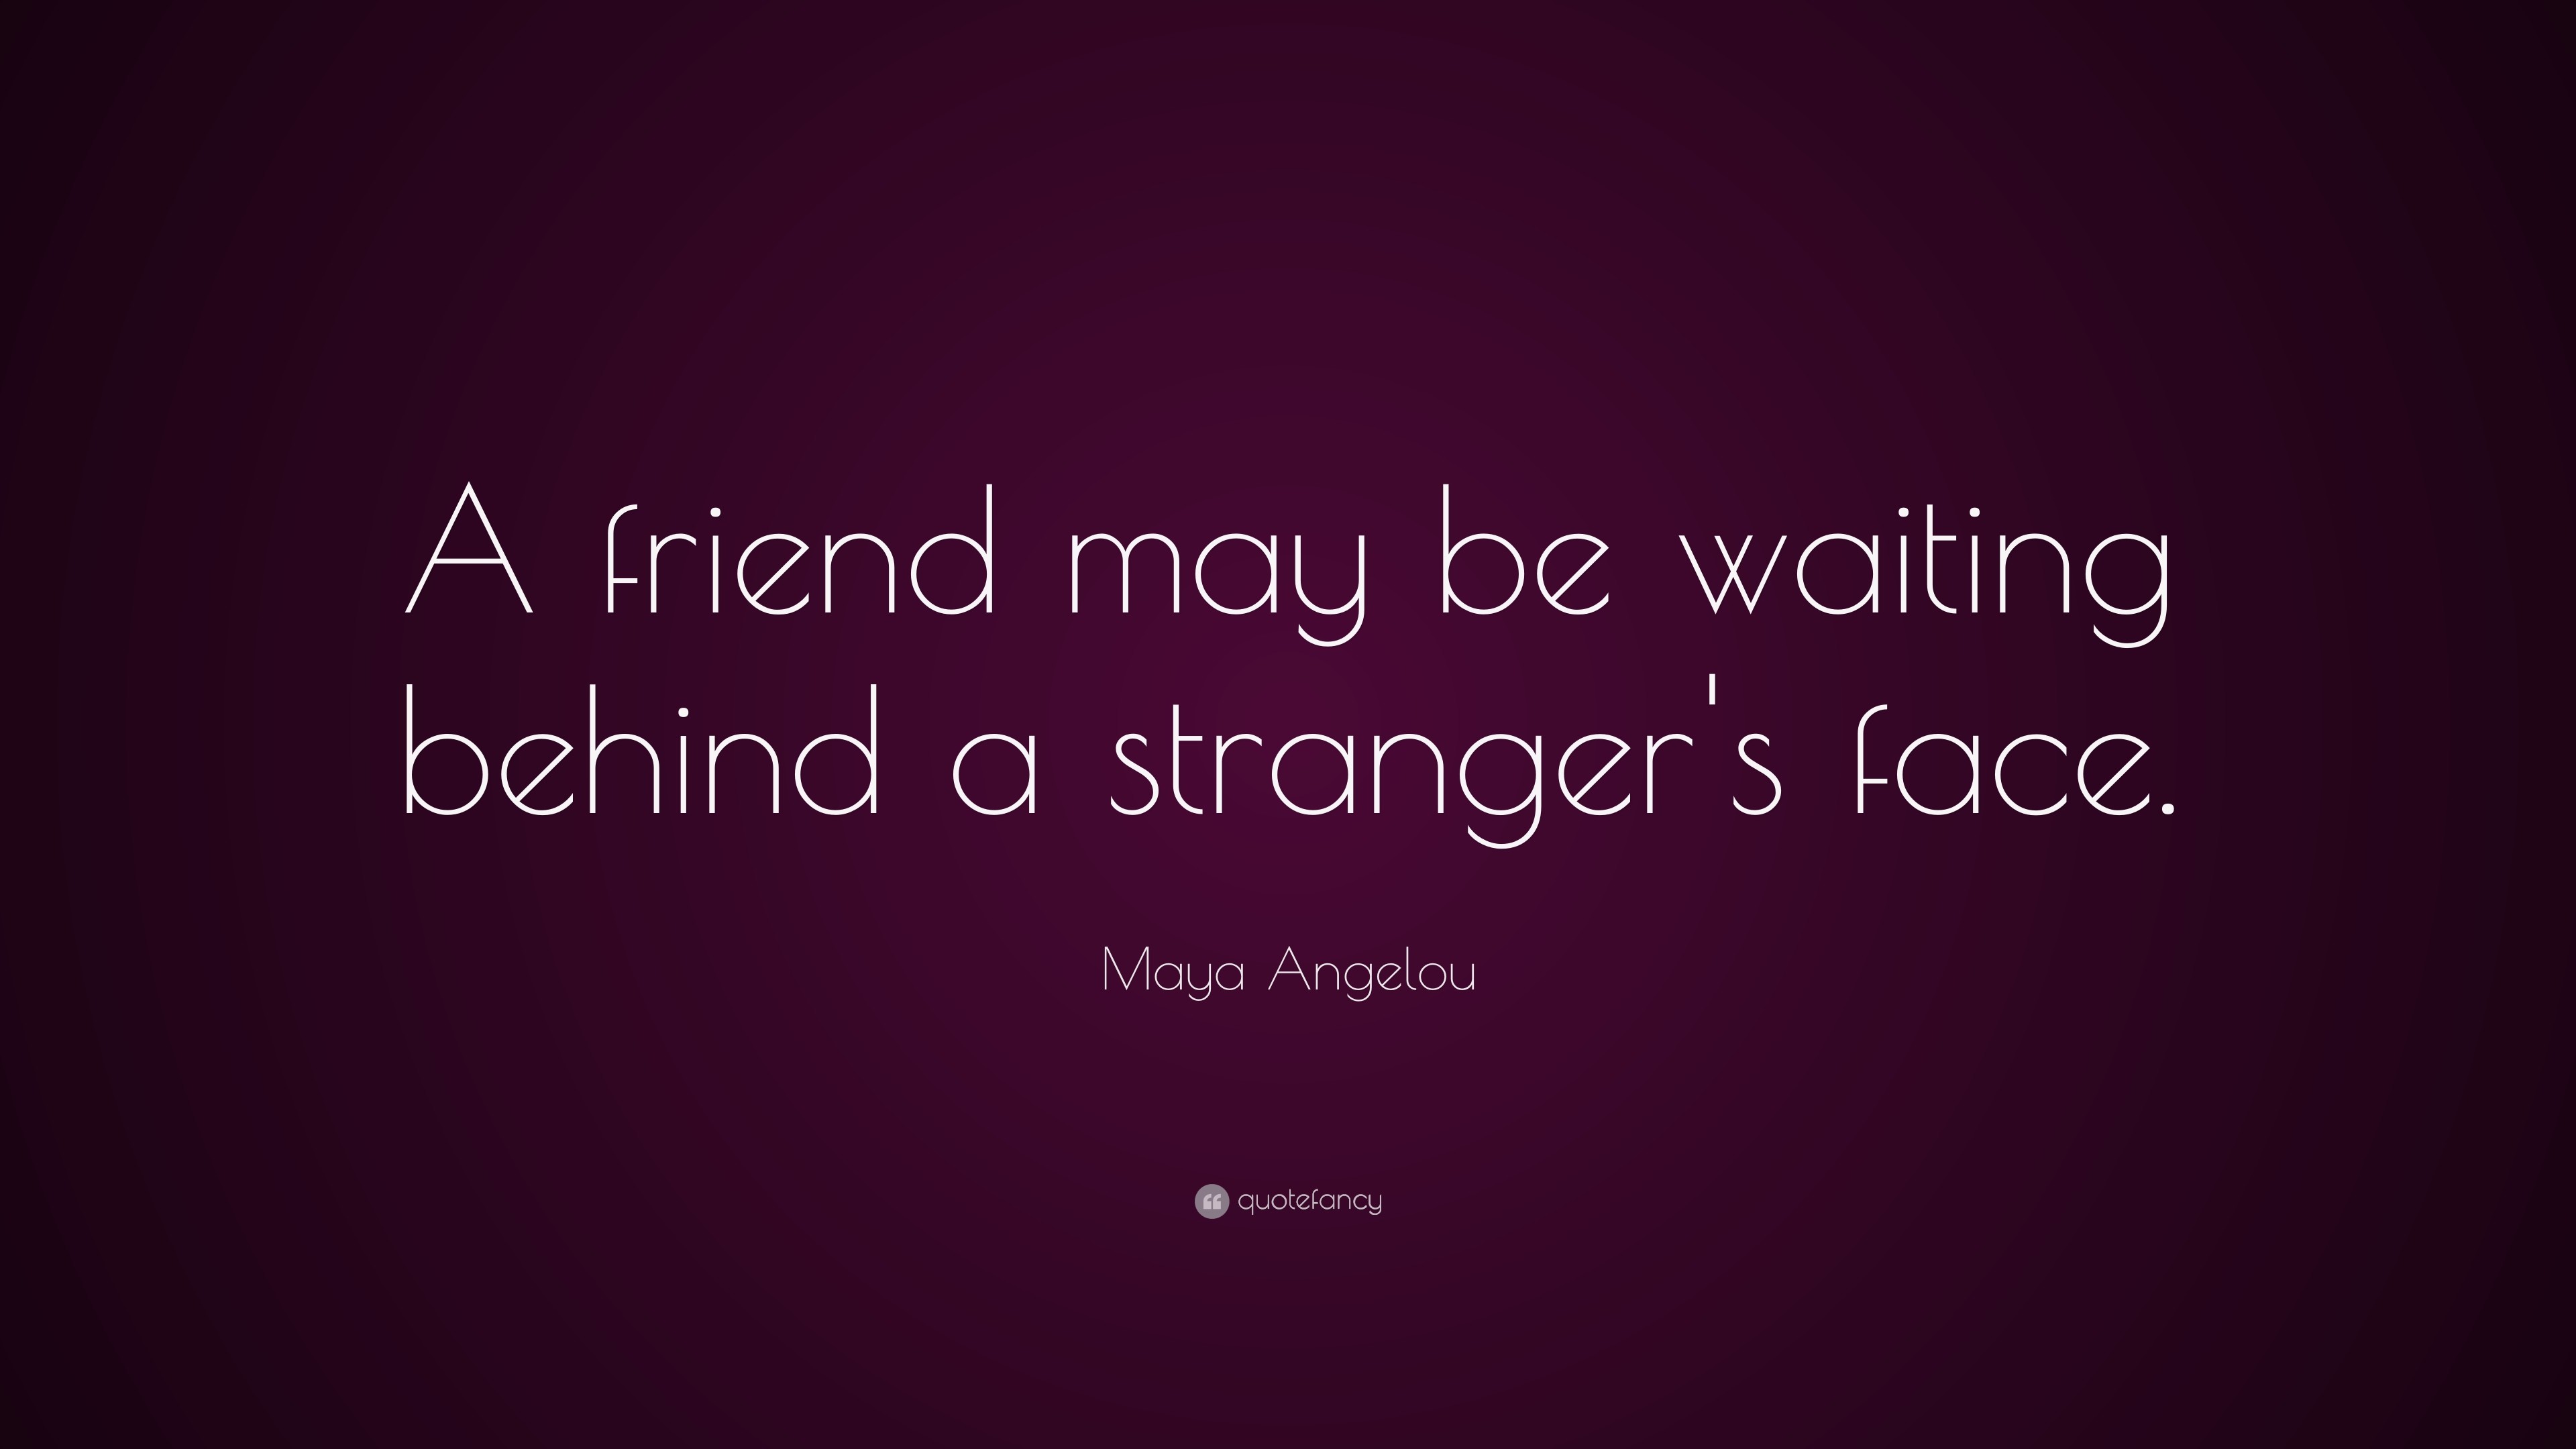 3840x2160 Friendship Quotes: “A friend may be waiting behind a stranger's face.” —